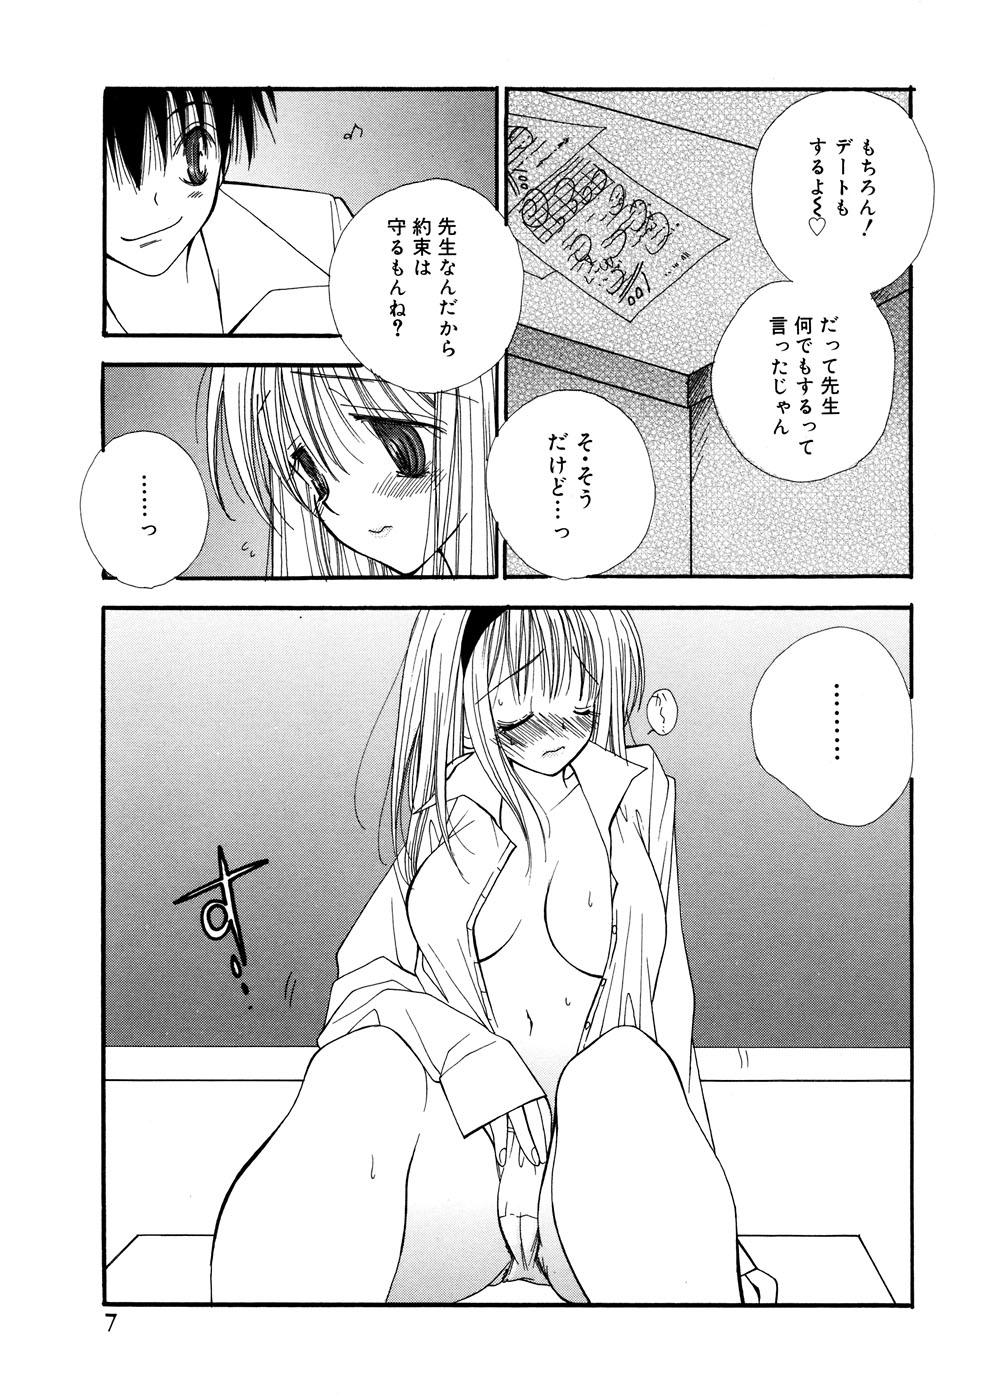 Load Onna Kyoushi Collection Blackdick - Page 8